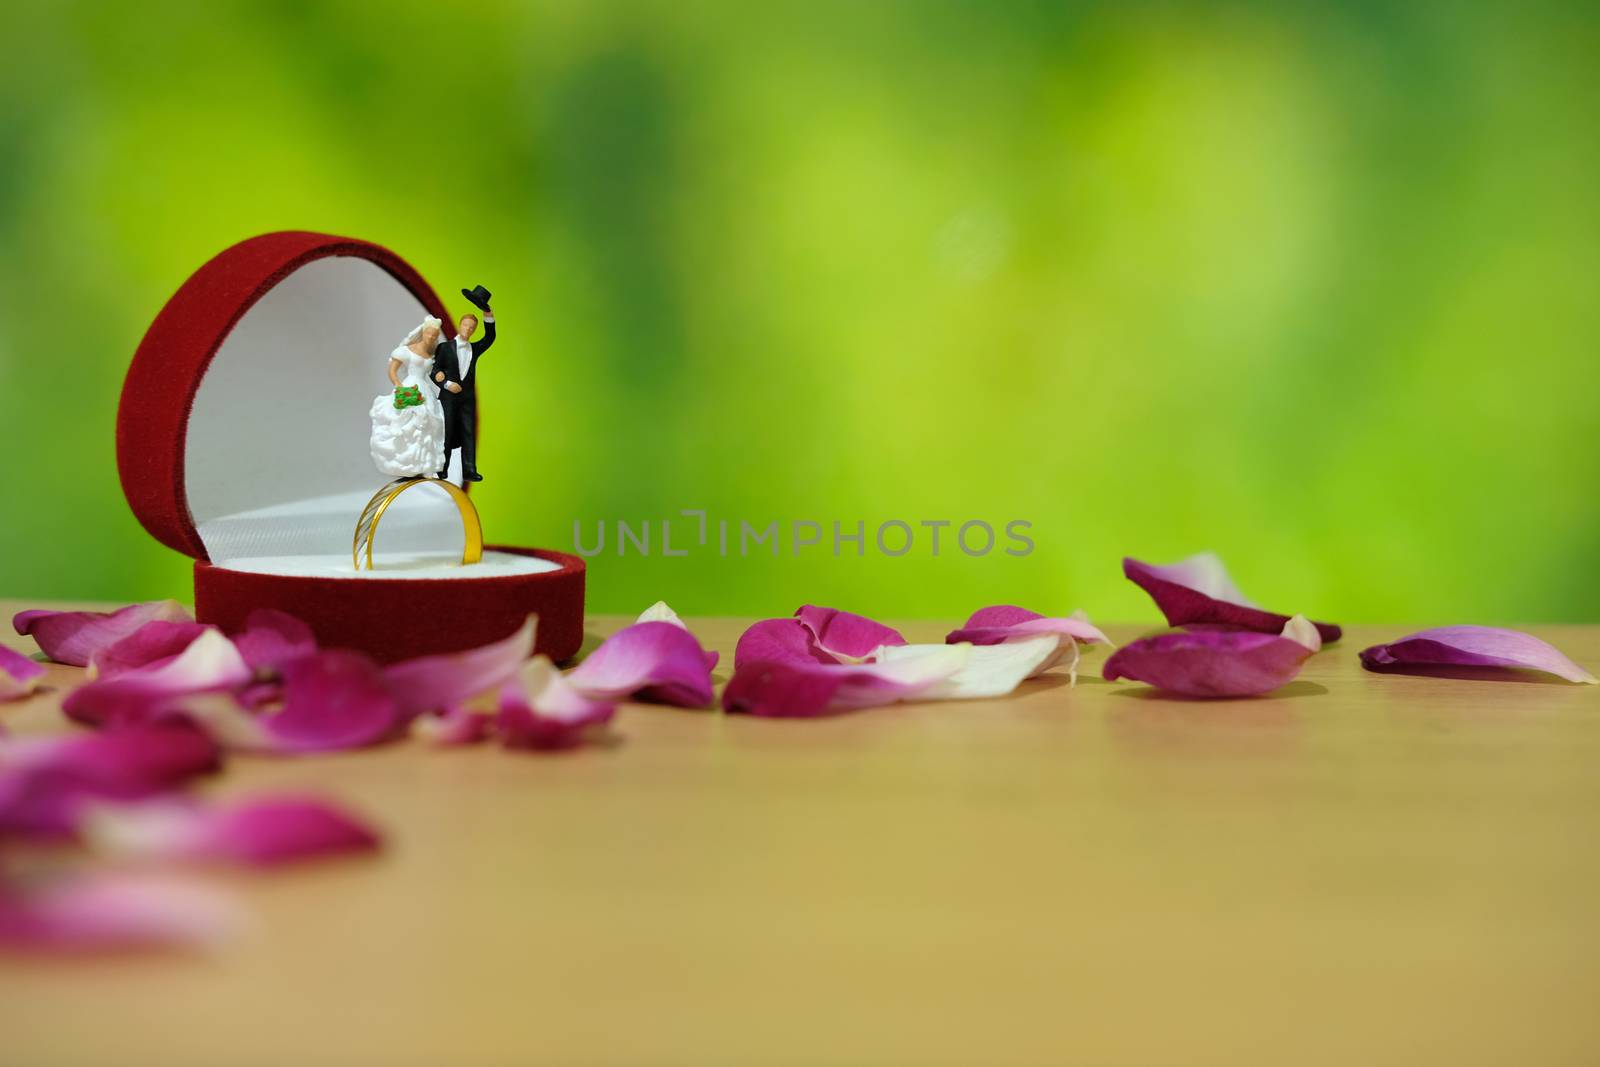 Miniature photography - outdoor garden wedding ceremony concept, bride and groom stand above ring box in the middle of red rose flower pile